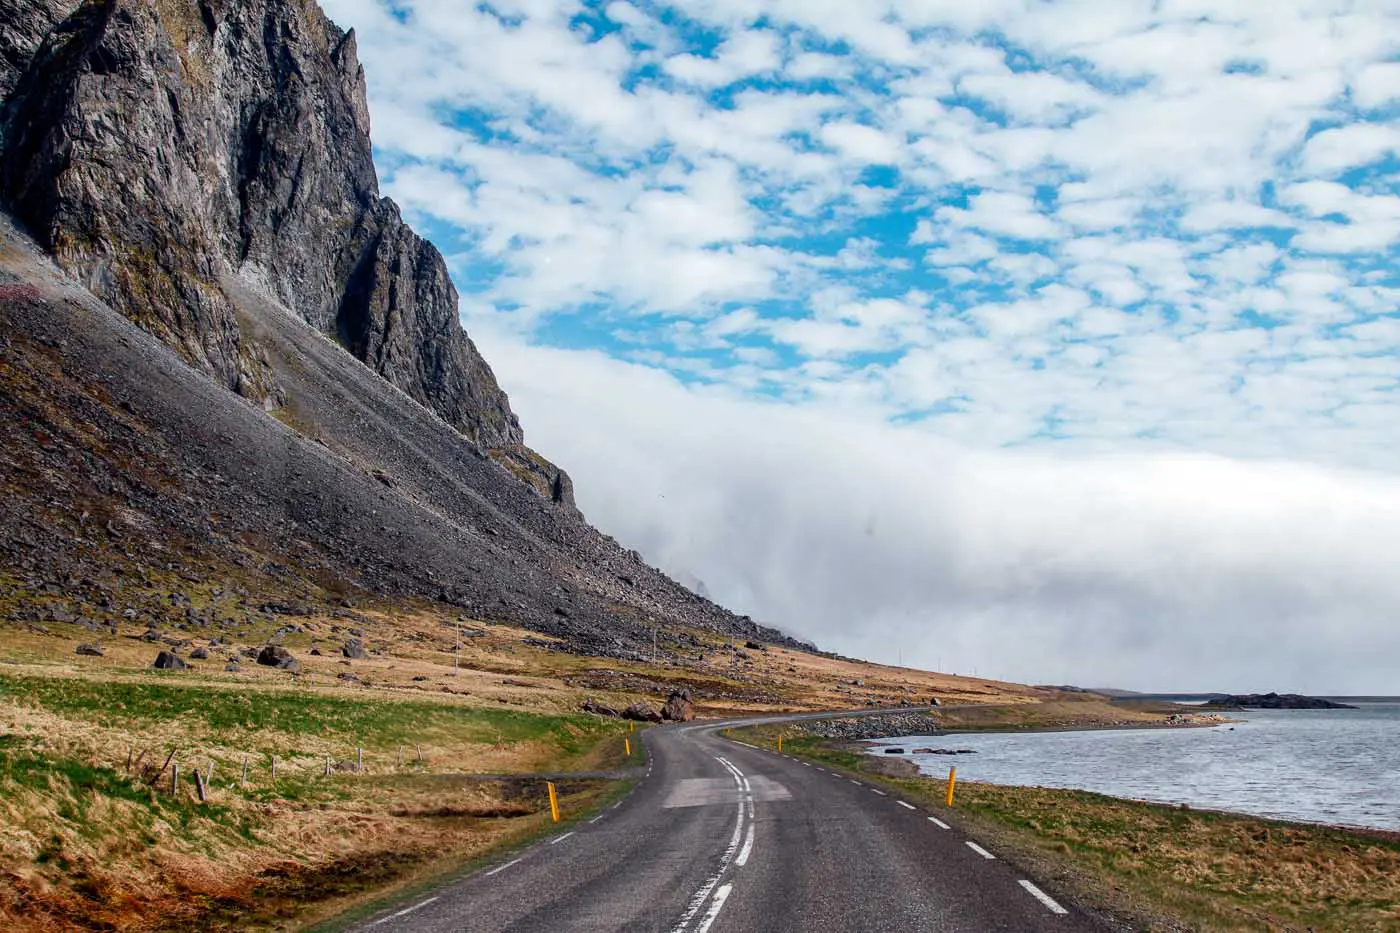 An empty road in Iceland. There are black mountains on the left and the ocean on the right.